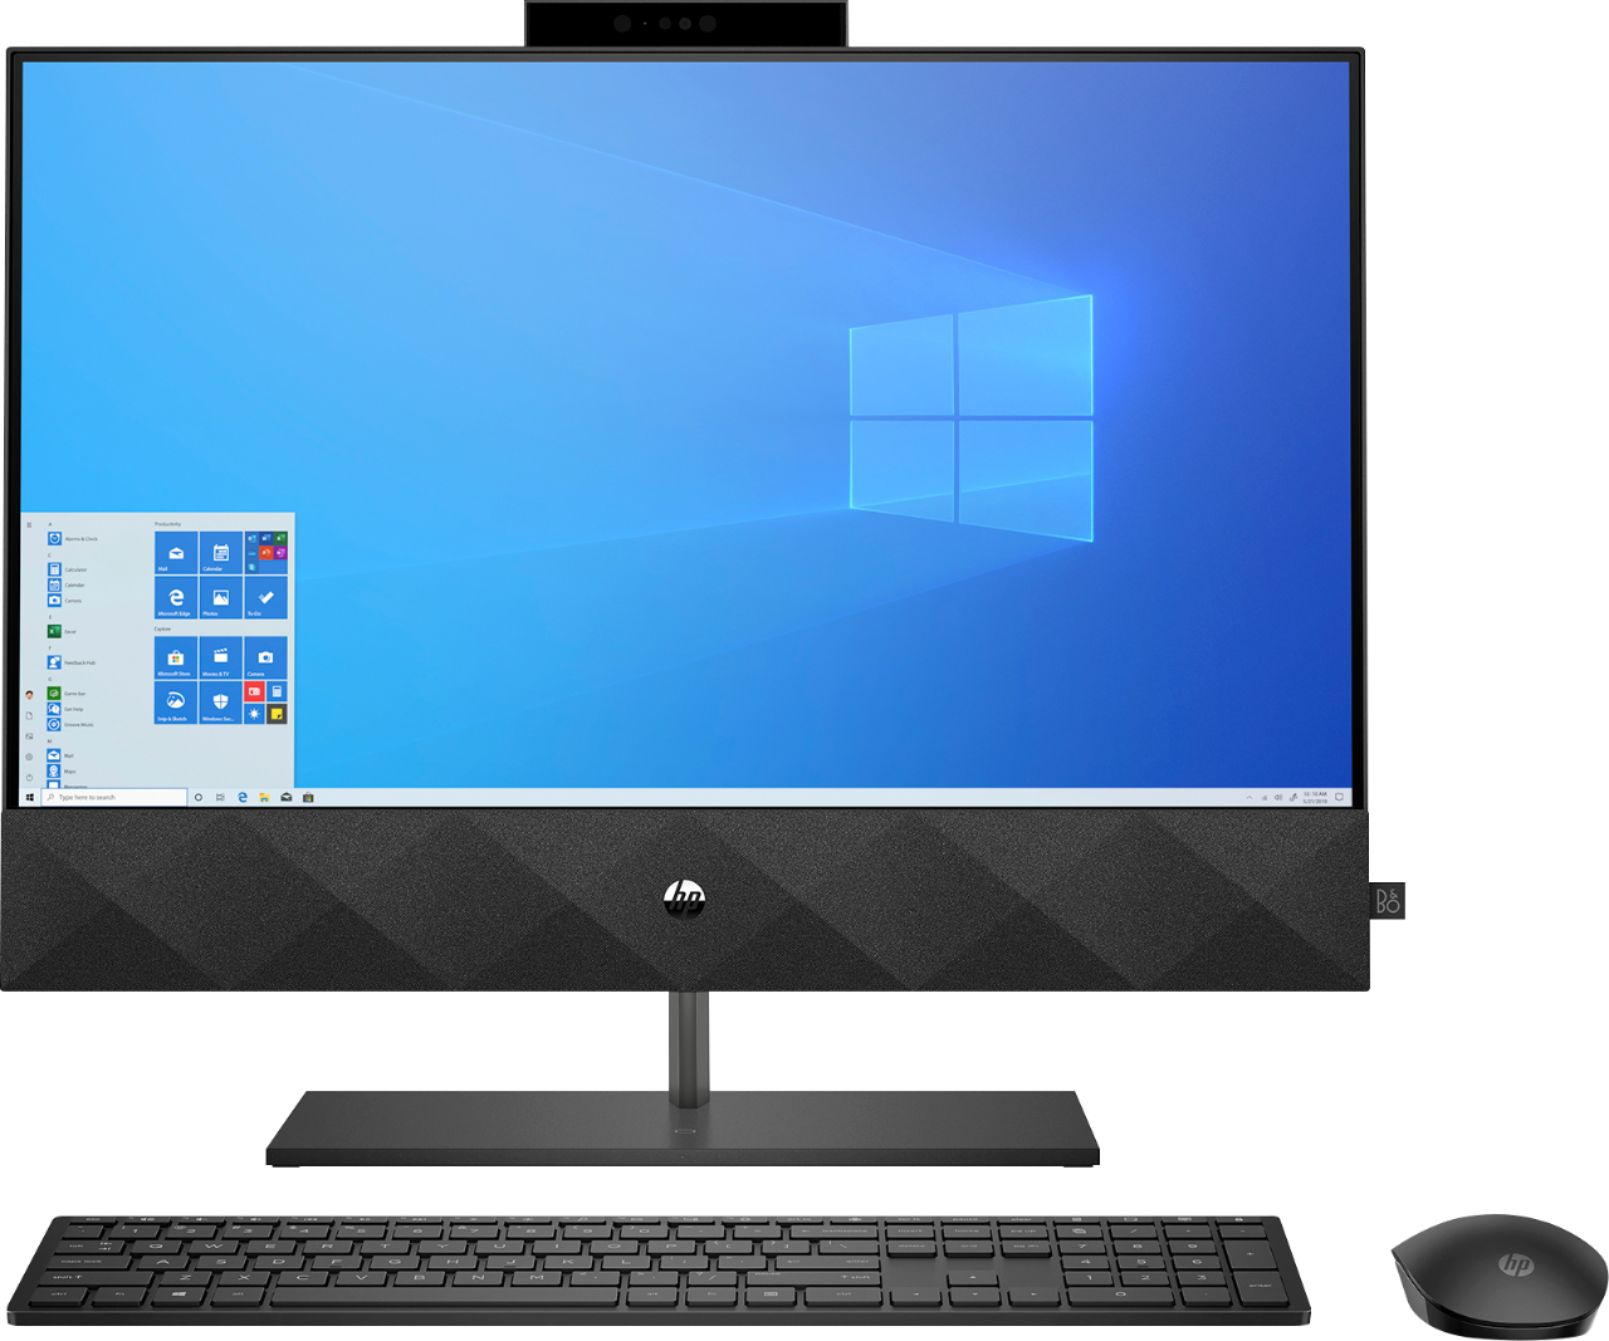 Pavilion 24" Touch-Screen All-In-One Intel Core i5 12GB Memory 256GB SSD Sparkling Black 24-k0024 - Buy